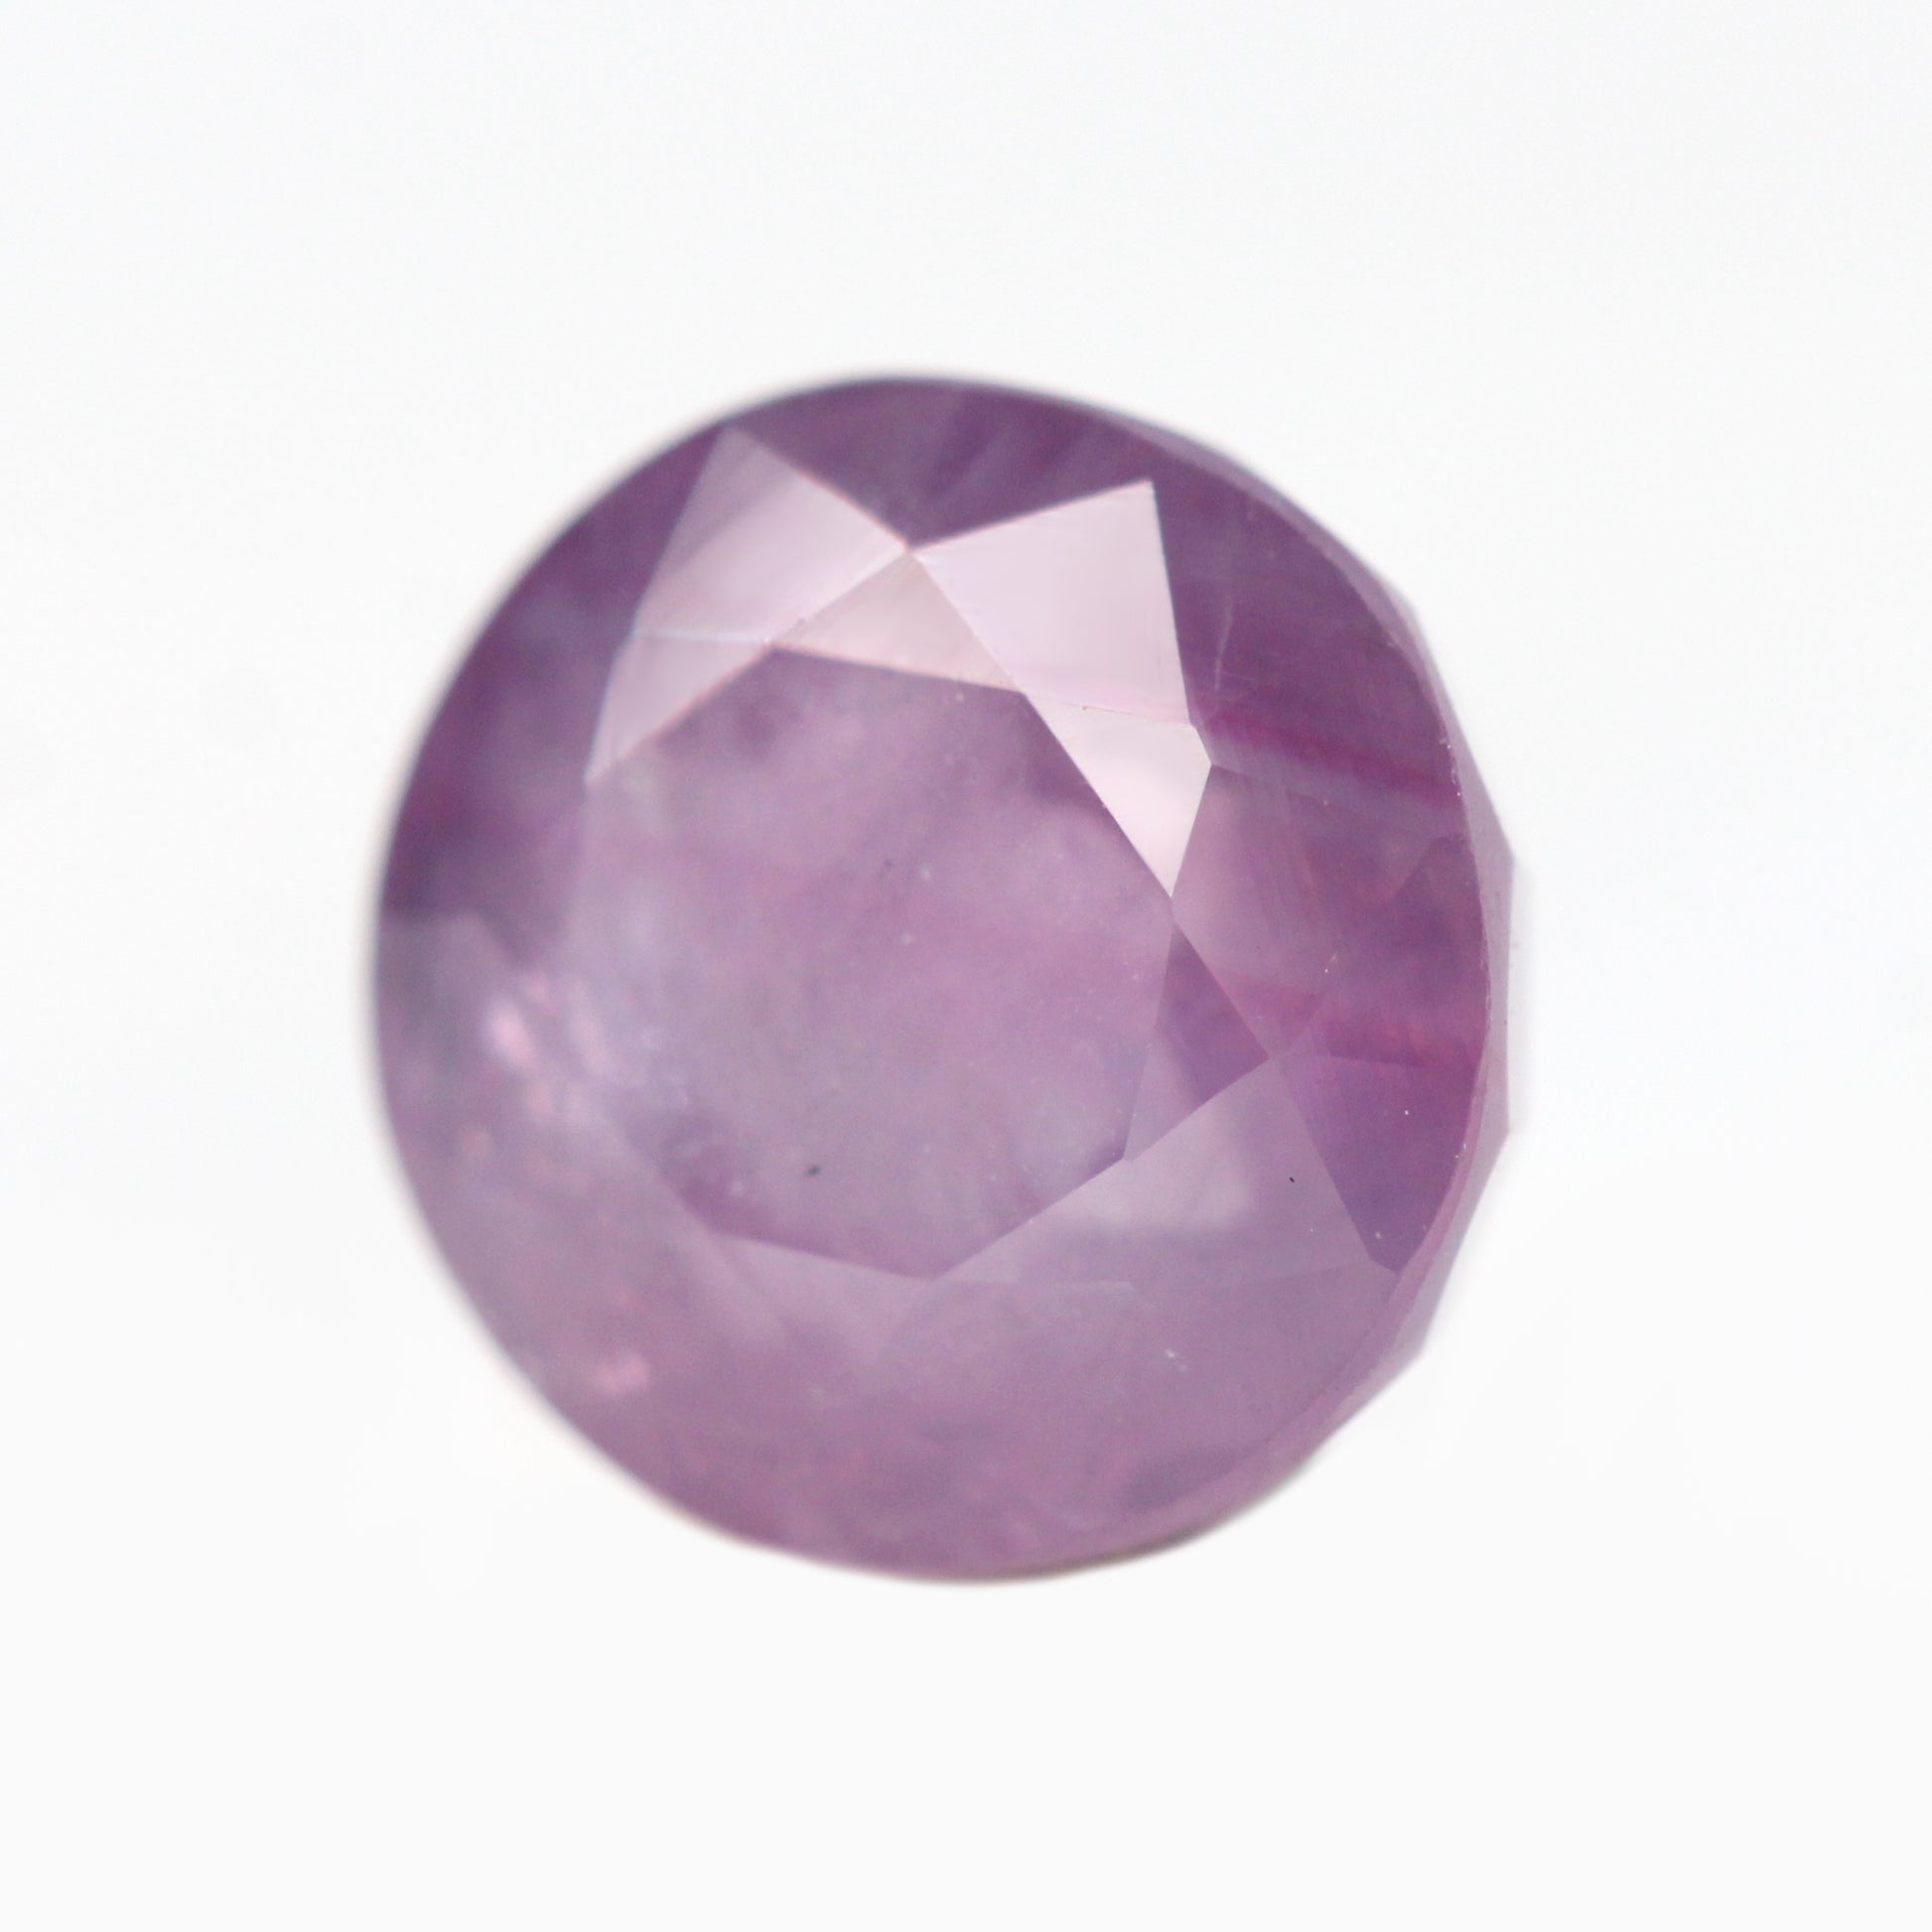 2.77 Carat Round Purple Pink Sapphire for Custom Work - Inventory Code PPRS277 - Midwinter Co. Alternative Bridal Rings and Modern Fine Jewelry